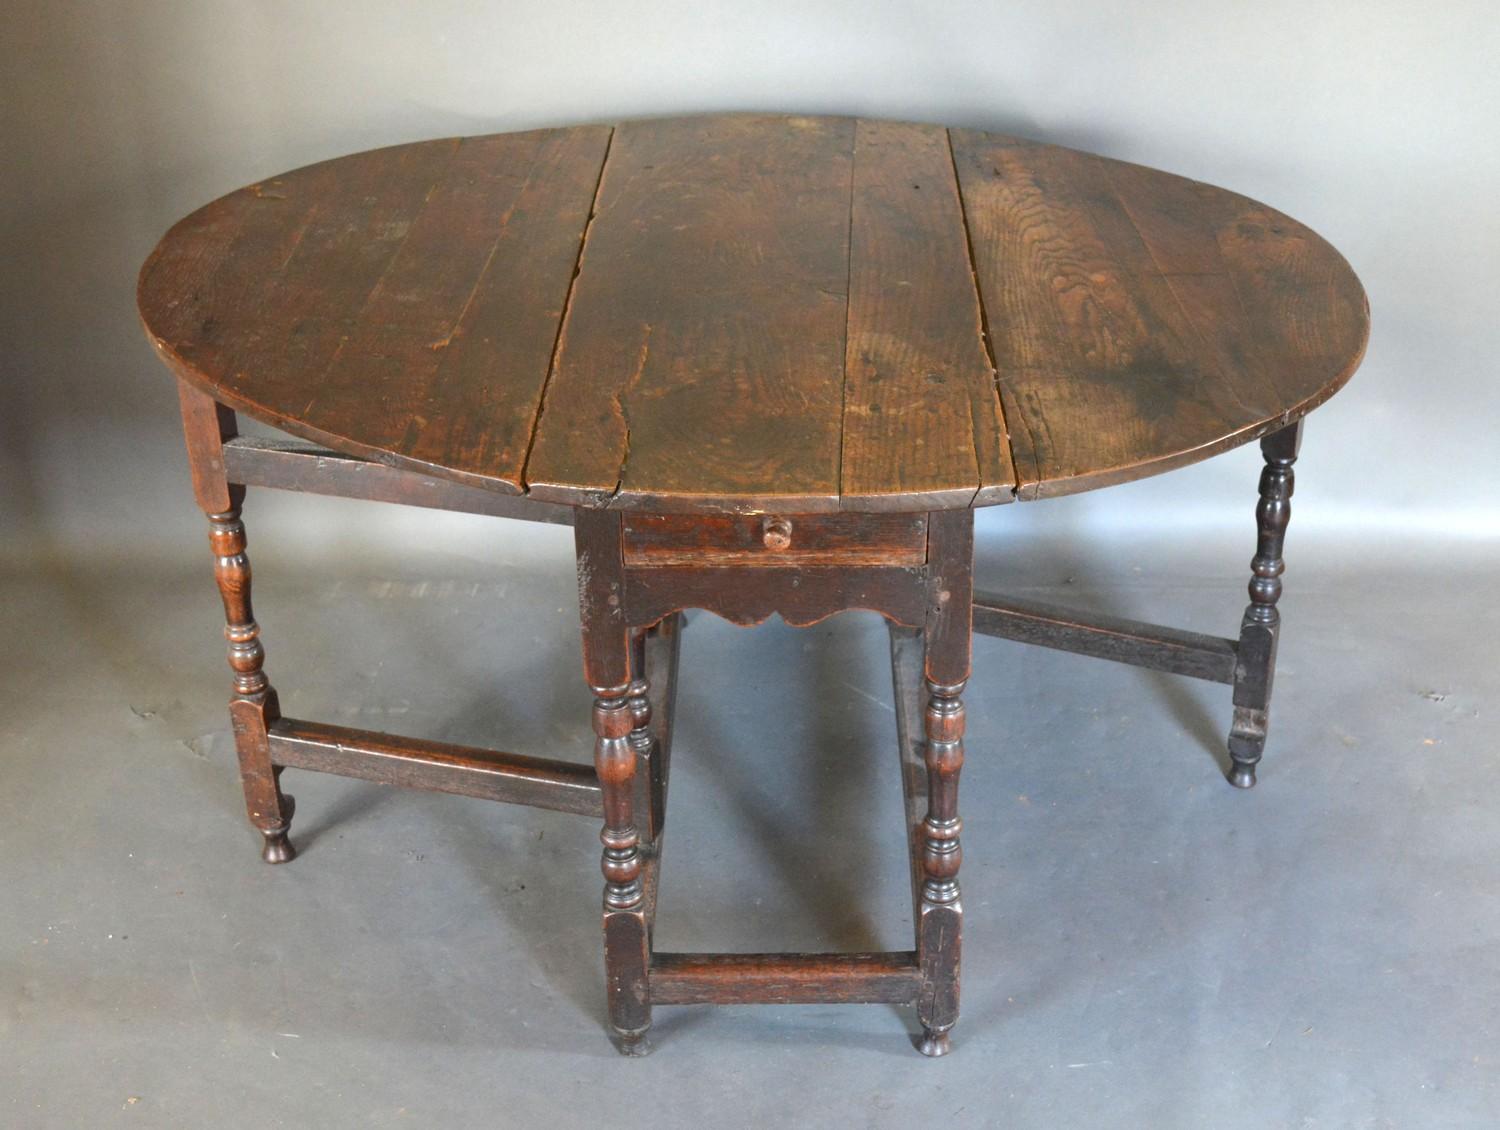 A George III Oak Oval Gate Legged Dining Table with a frieze drawer raised upon turned legs with - Image 2 of 2